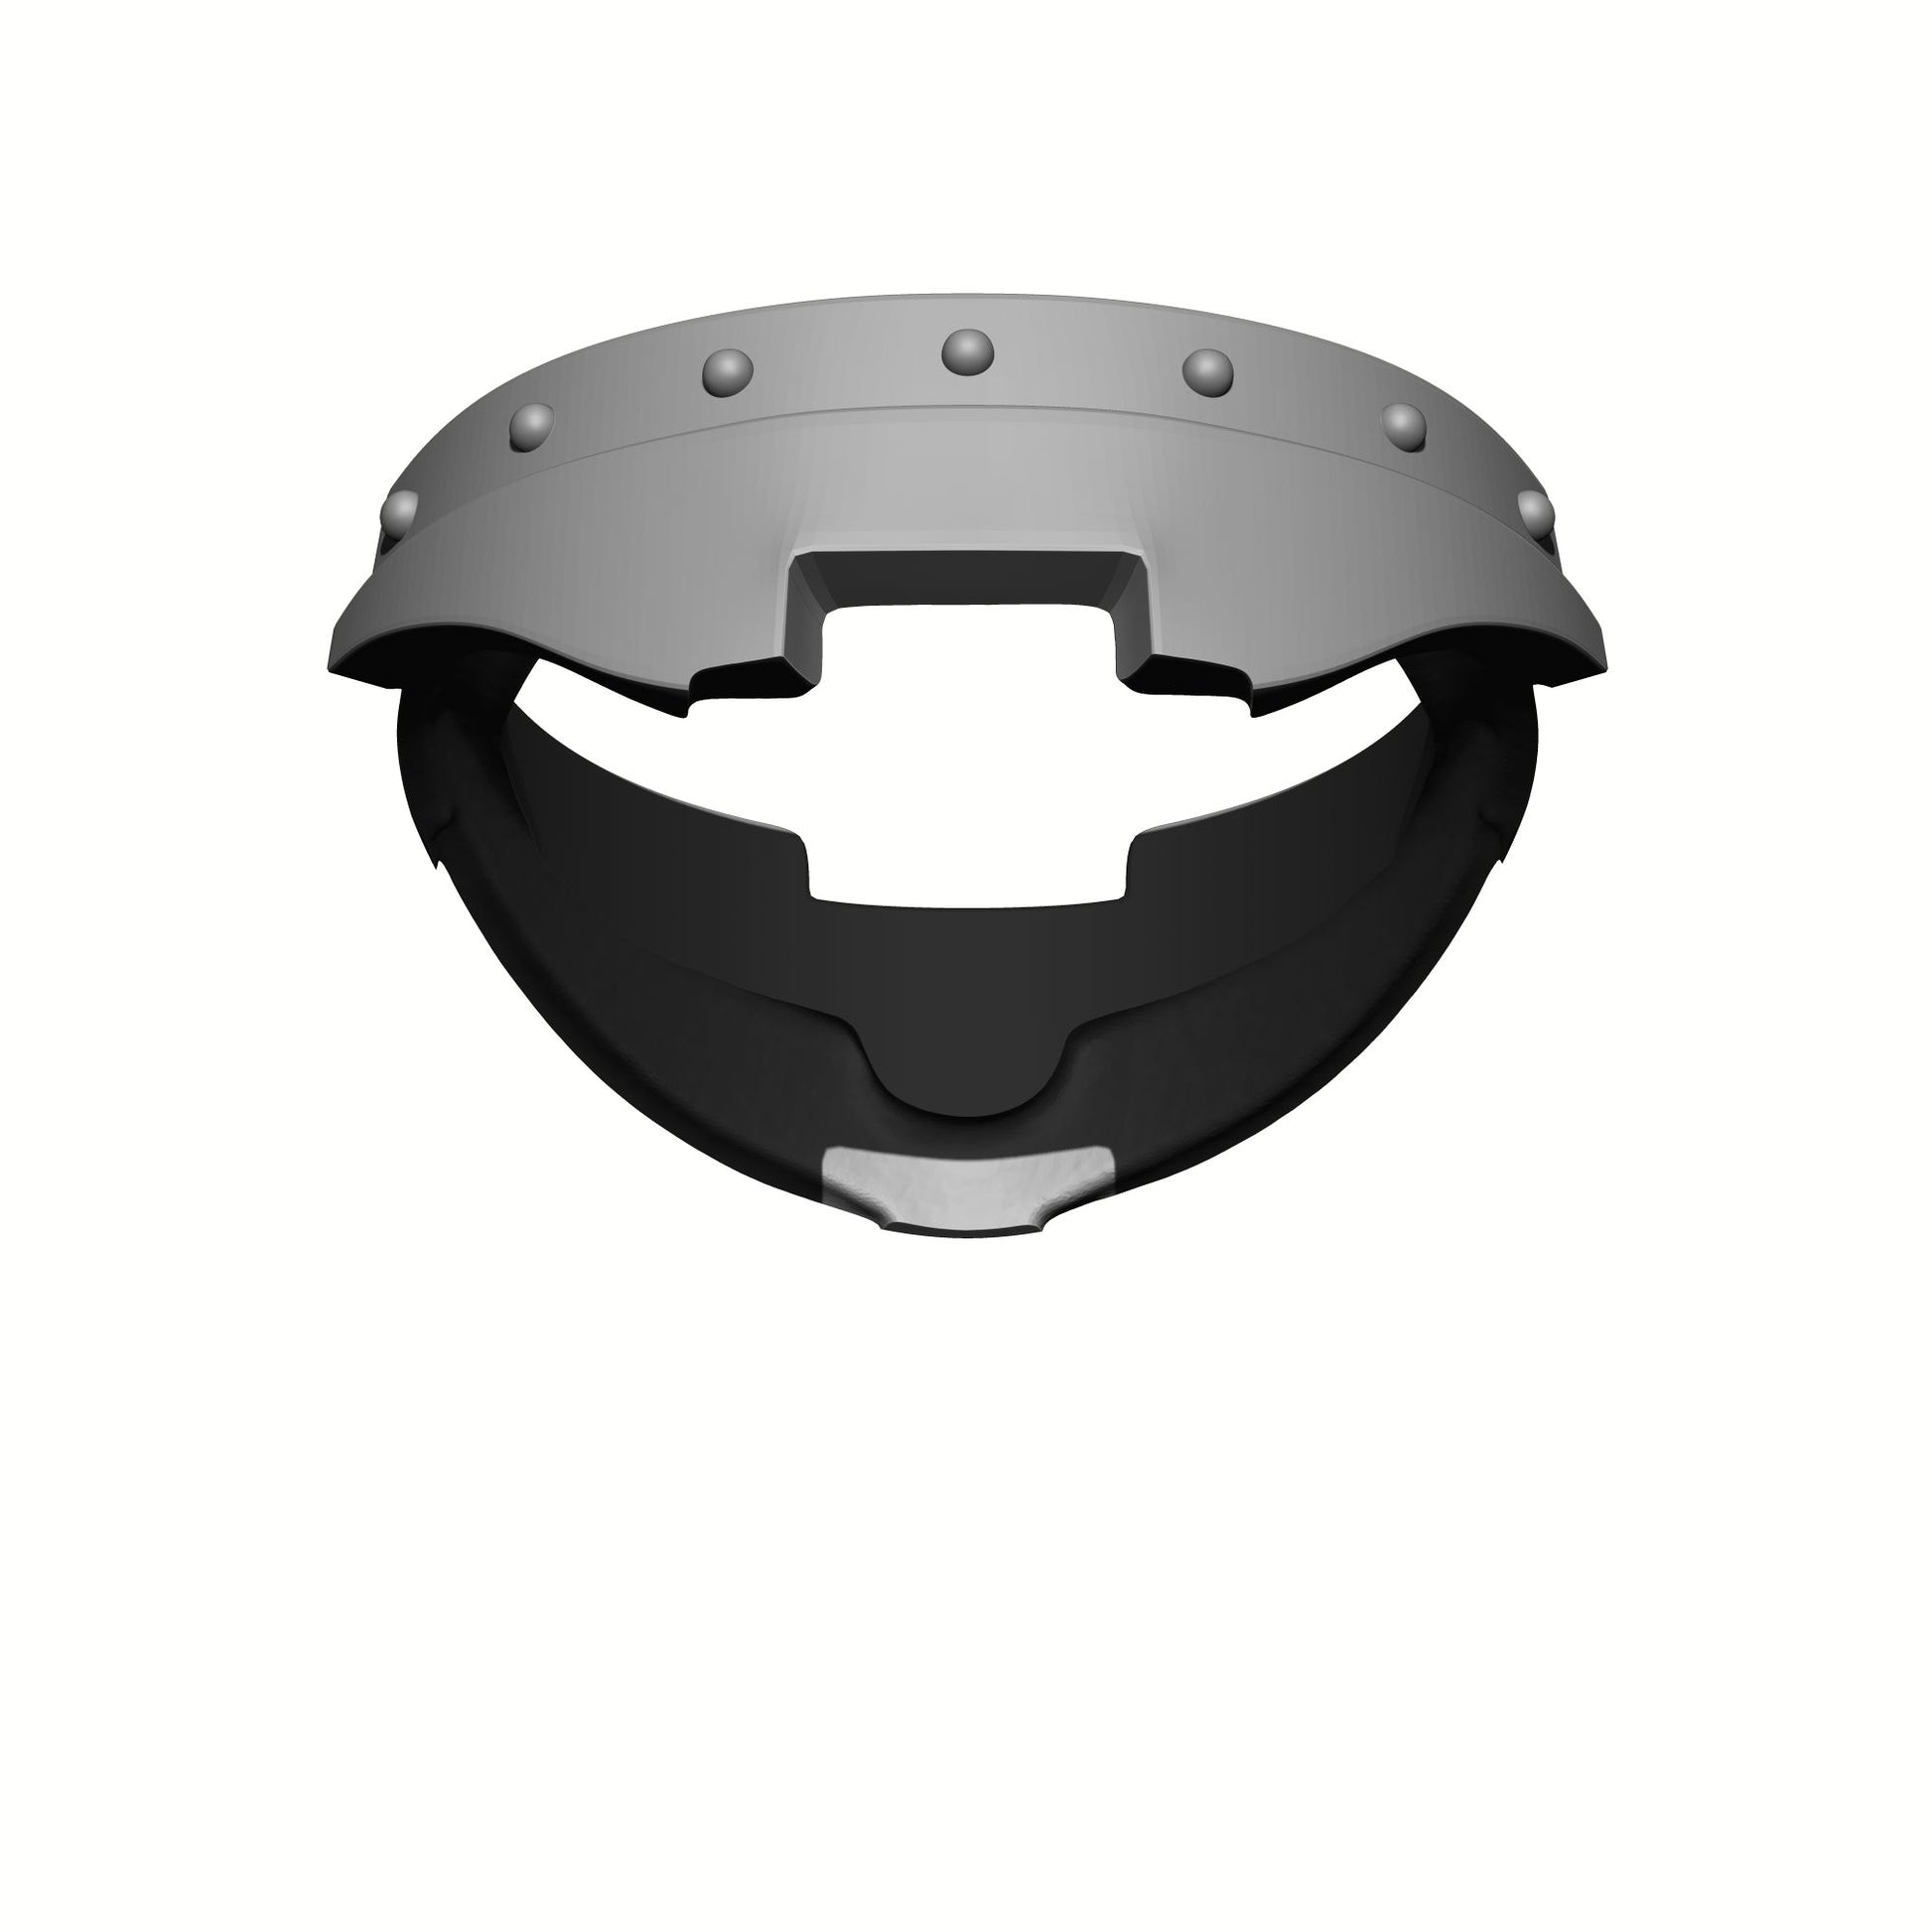 Back of the Armor - Gorget with Circular Grill and Rivets for McFarlane Space Marine Captain Gravis Armor